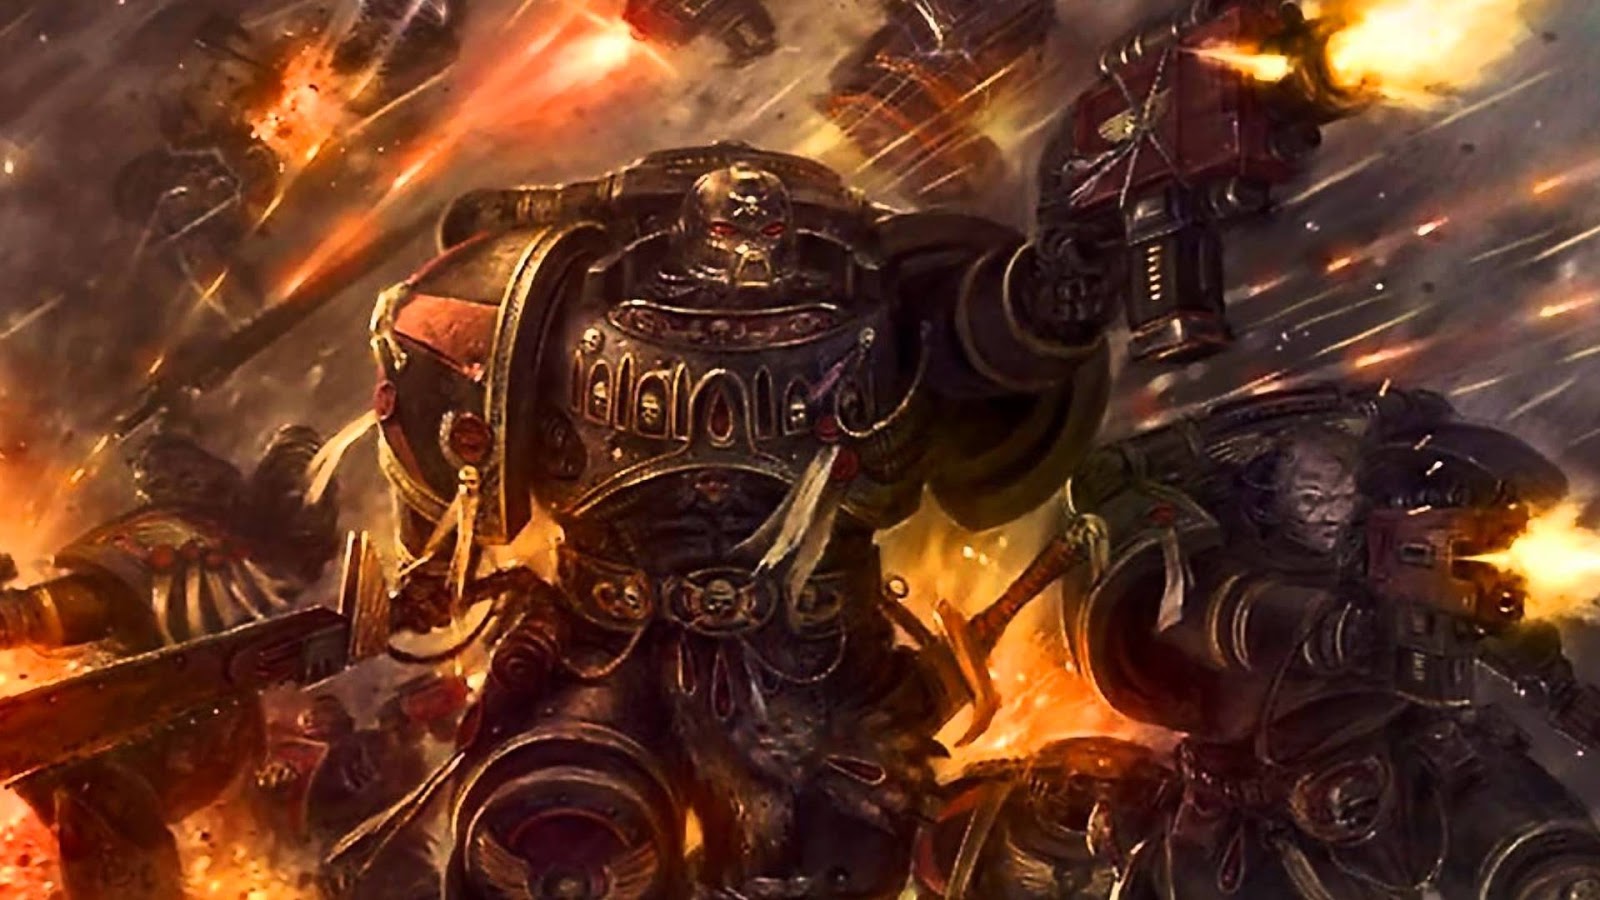 Blood Angels Death Company 40k Rules Revealed!